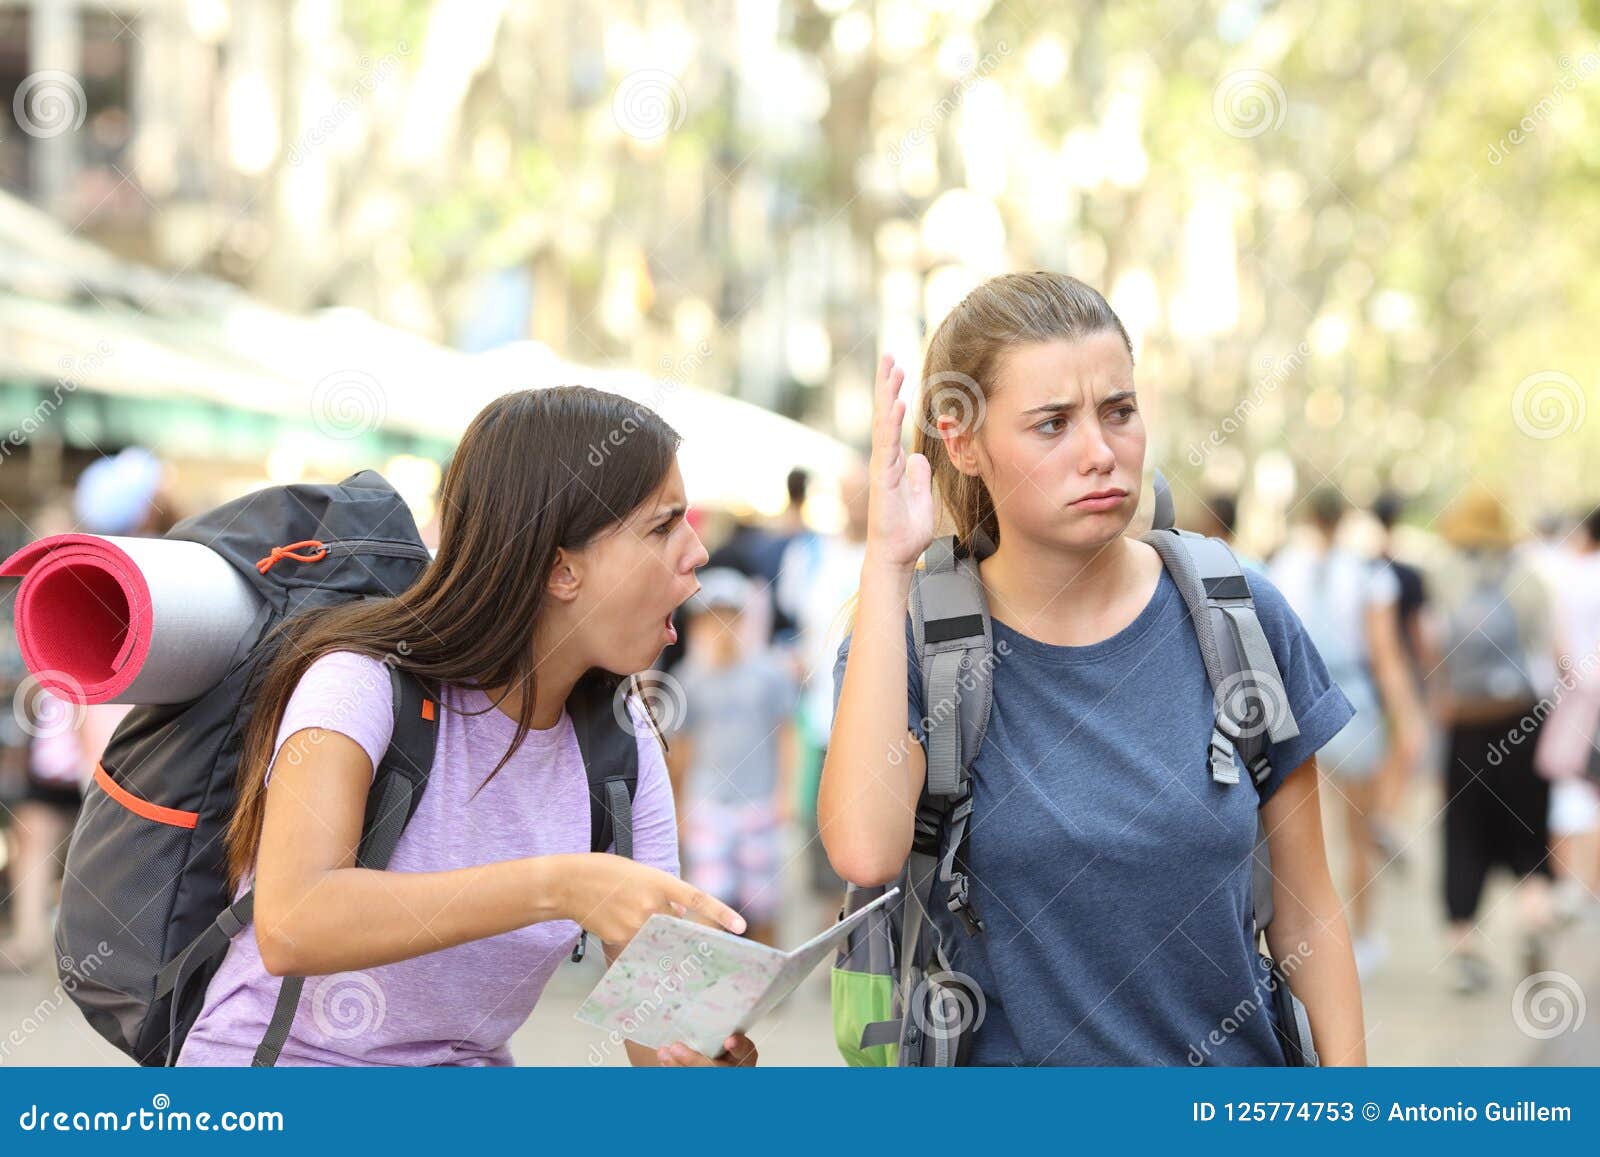 Angry Backpackers Arguing During Vacation Travel Stock Image Image Of 